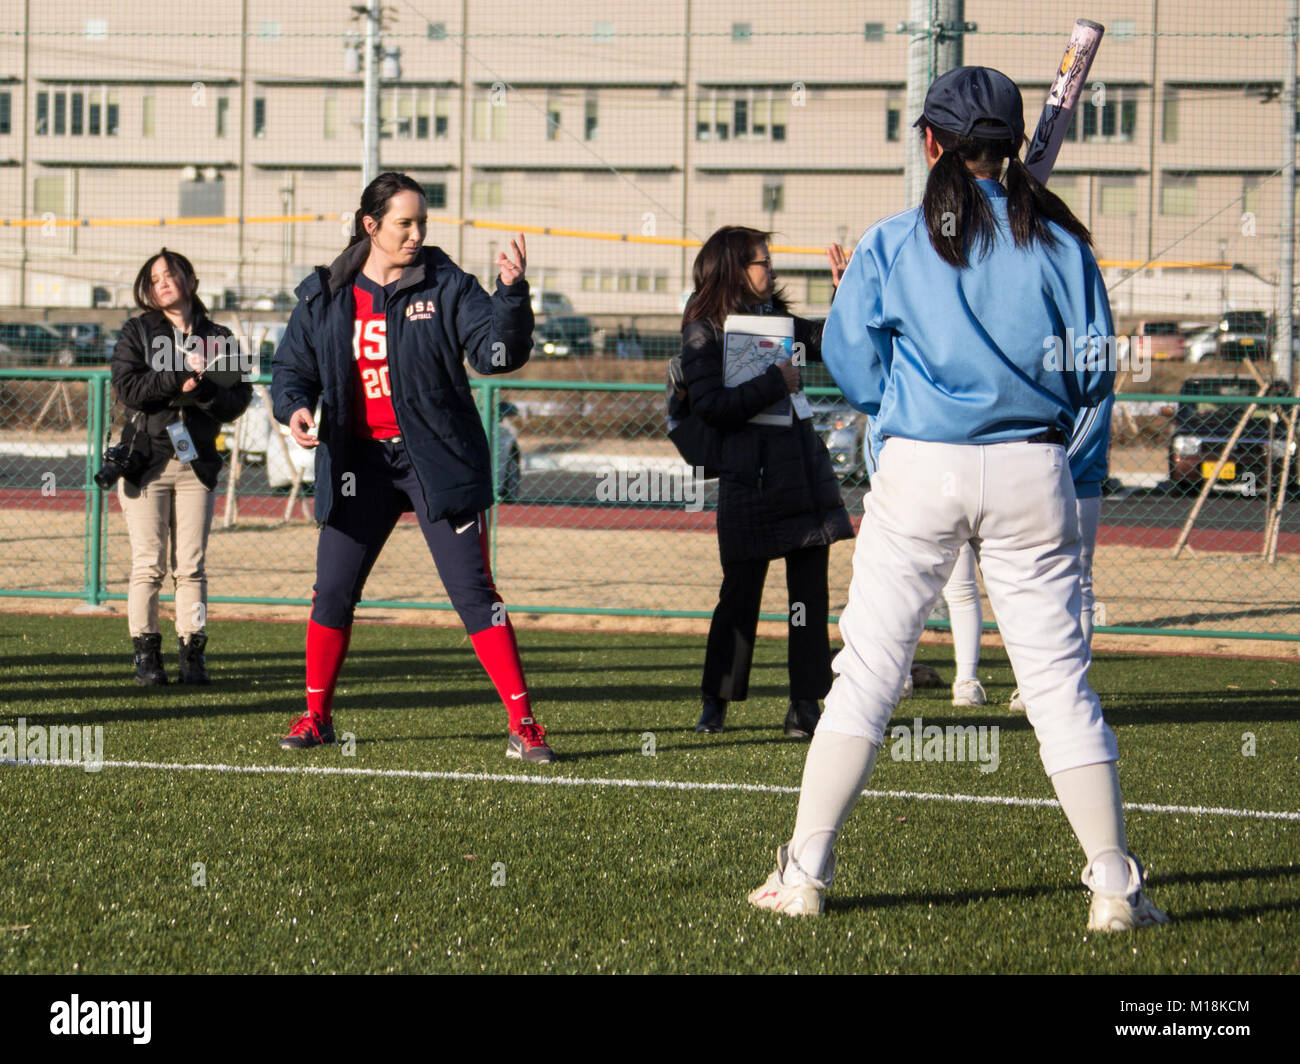 Valerie Arioto, an infielder with the U.S.A. National Women’s Softball team, throws the ball to a teenager from the Higashi Middle School softball team at the new Kizuna stadium in Iwakuni City, Japan, Jan. 25, 2018. The U.S.A National Women’s Softball team visited players from middle and elementary schools to practice together. The intent of the U.S. softball team’s visit was to determine if the stadium is suitable for the team to practice and play future games at. The stadium is a hallmark of what the U.S.-Japan friendship has accomplished in Iwakuni City. Everything from the dogwood trees p Stock Photo